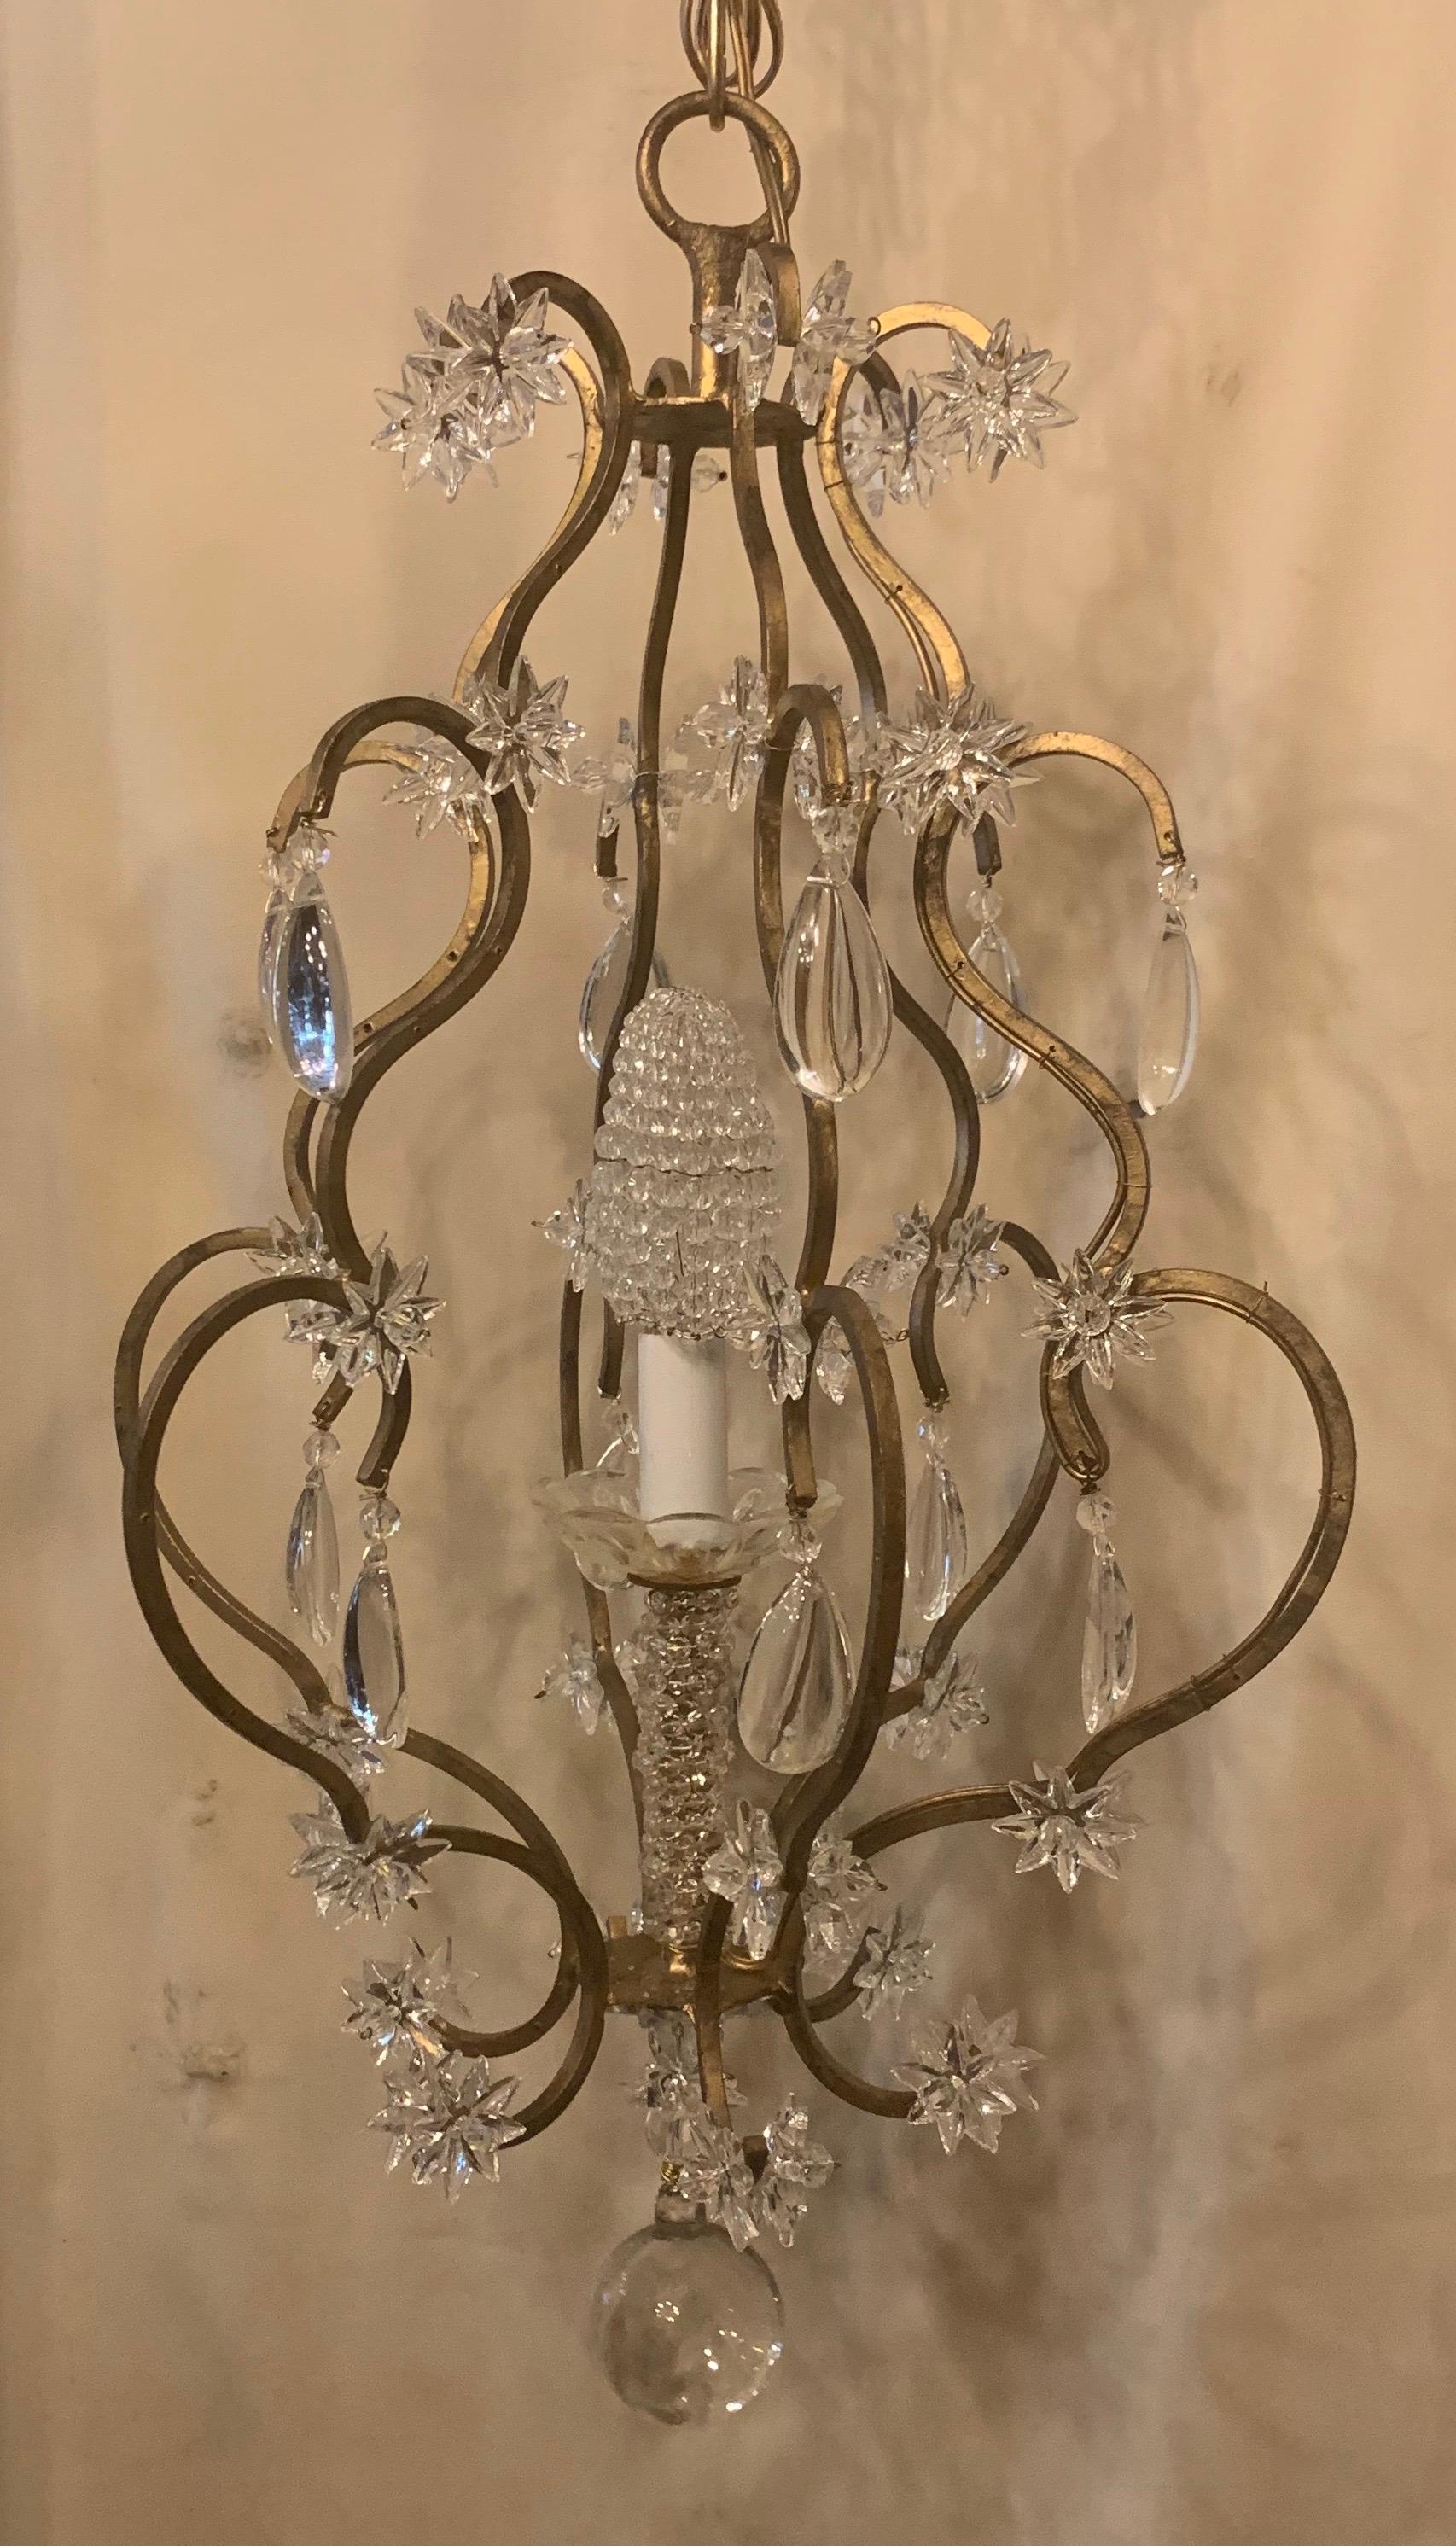 A wonderful beaded gold gilt star basket form pendant chandelier petite single candelabra light fixture with beaded bulb cover, completely rewired and comes with chain, canopy and mounting hardware for installation
In the manner of Baguès.